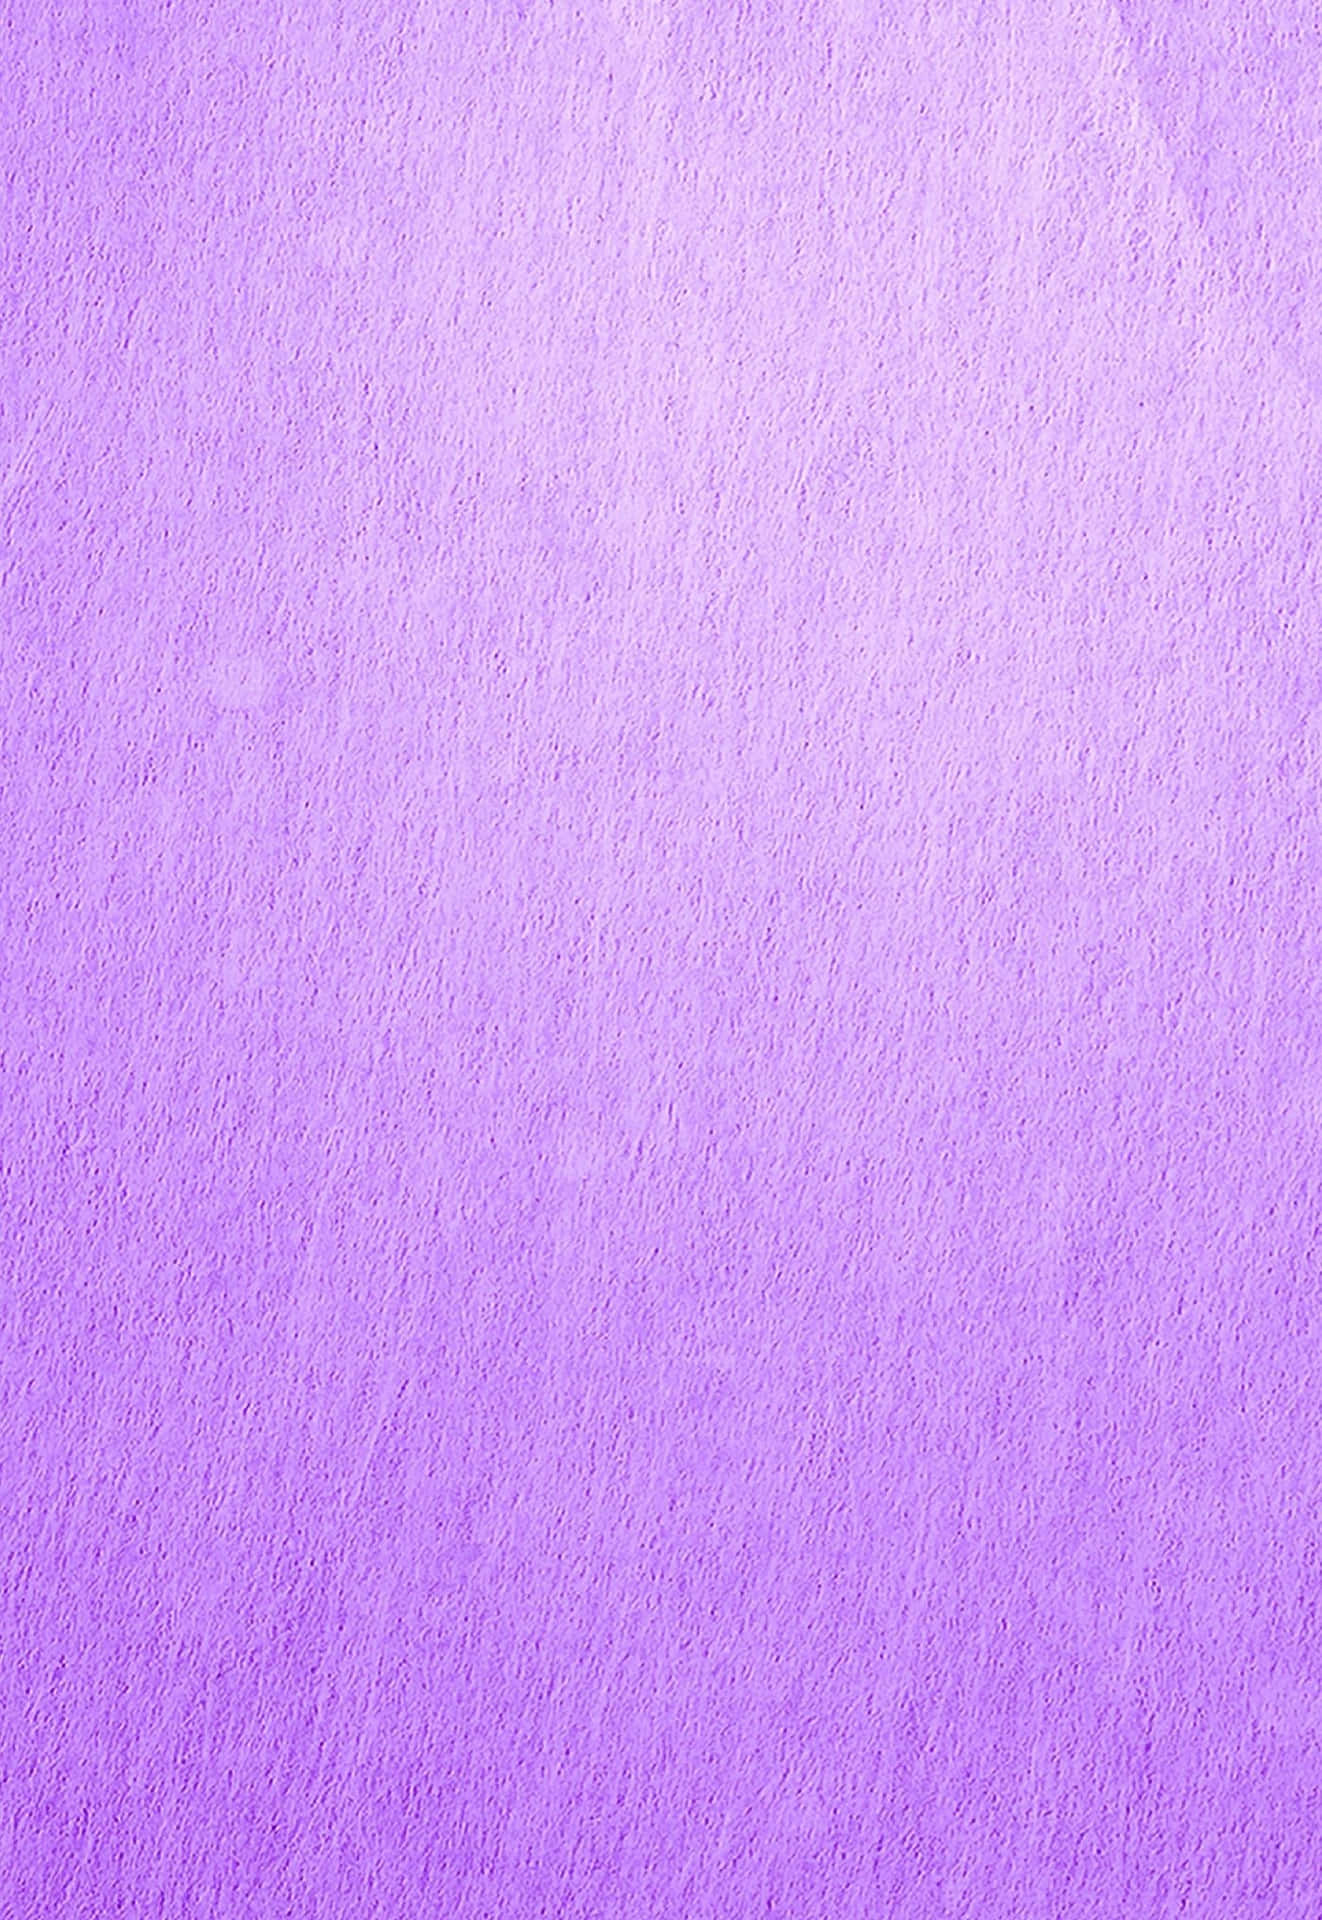 A Purple Background With A White Polka Dot